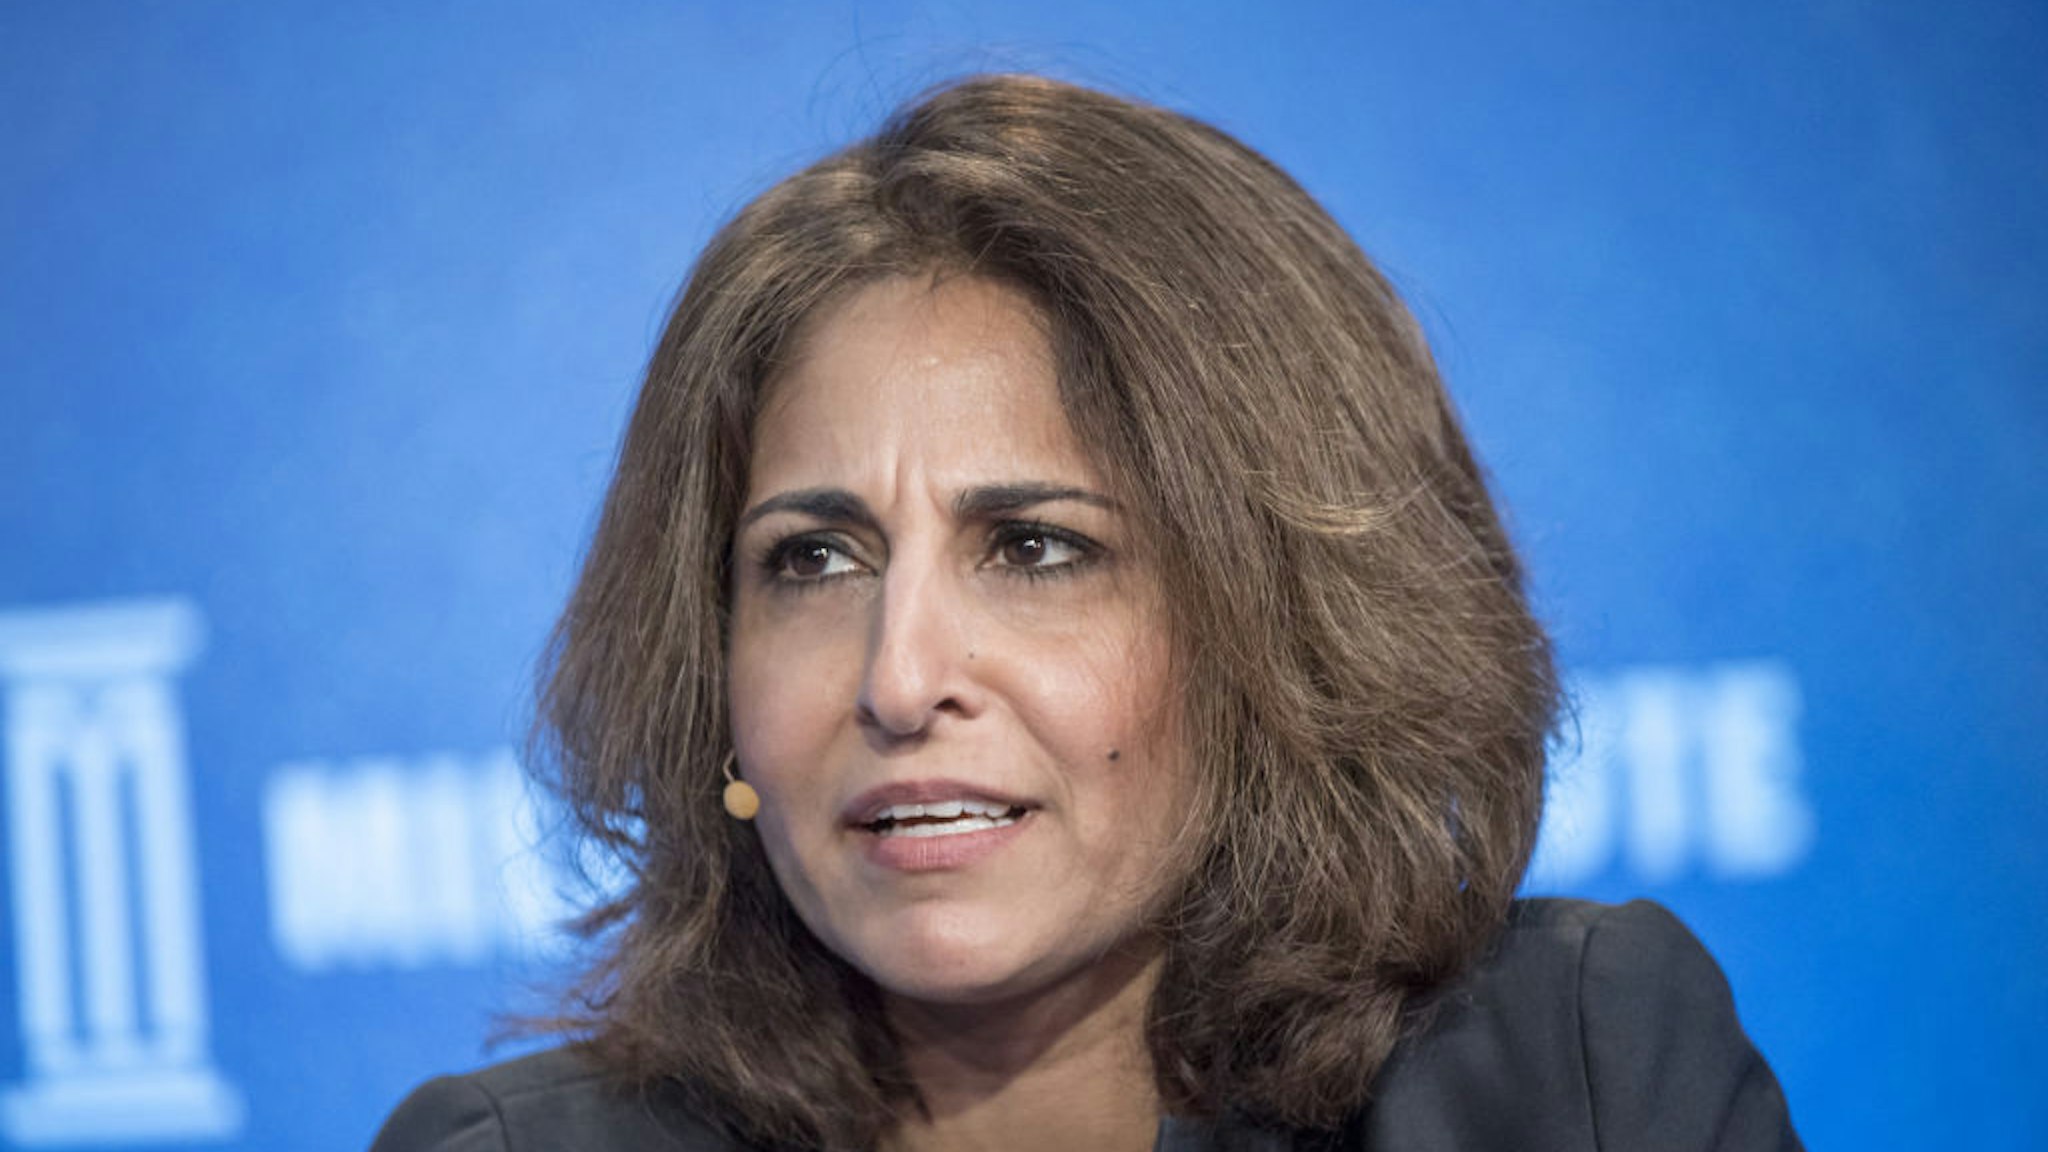 Neera Tanden, president and chief executive officer of Center for American Progress, speaks at the Milken Institute Global Conference in Beverly Hills, California, U.S., on Tuesday, May 2, 2017.